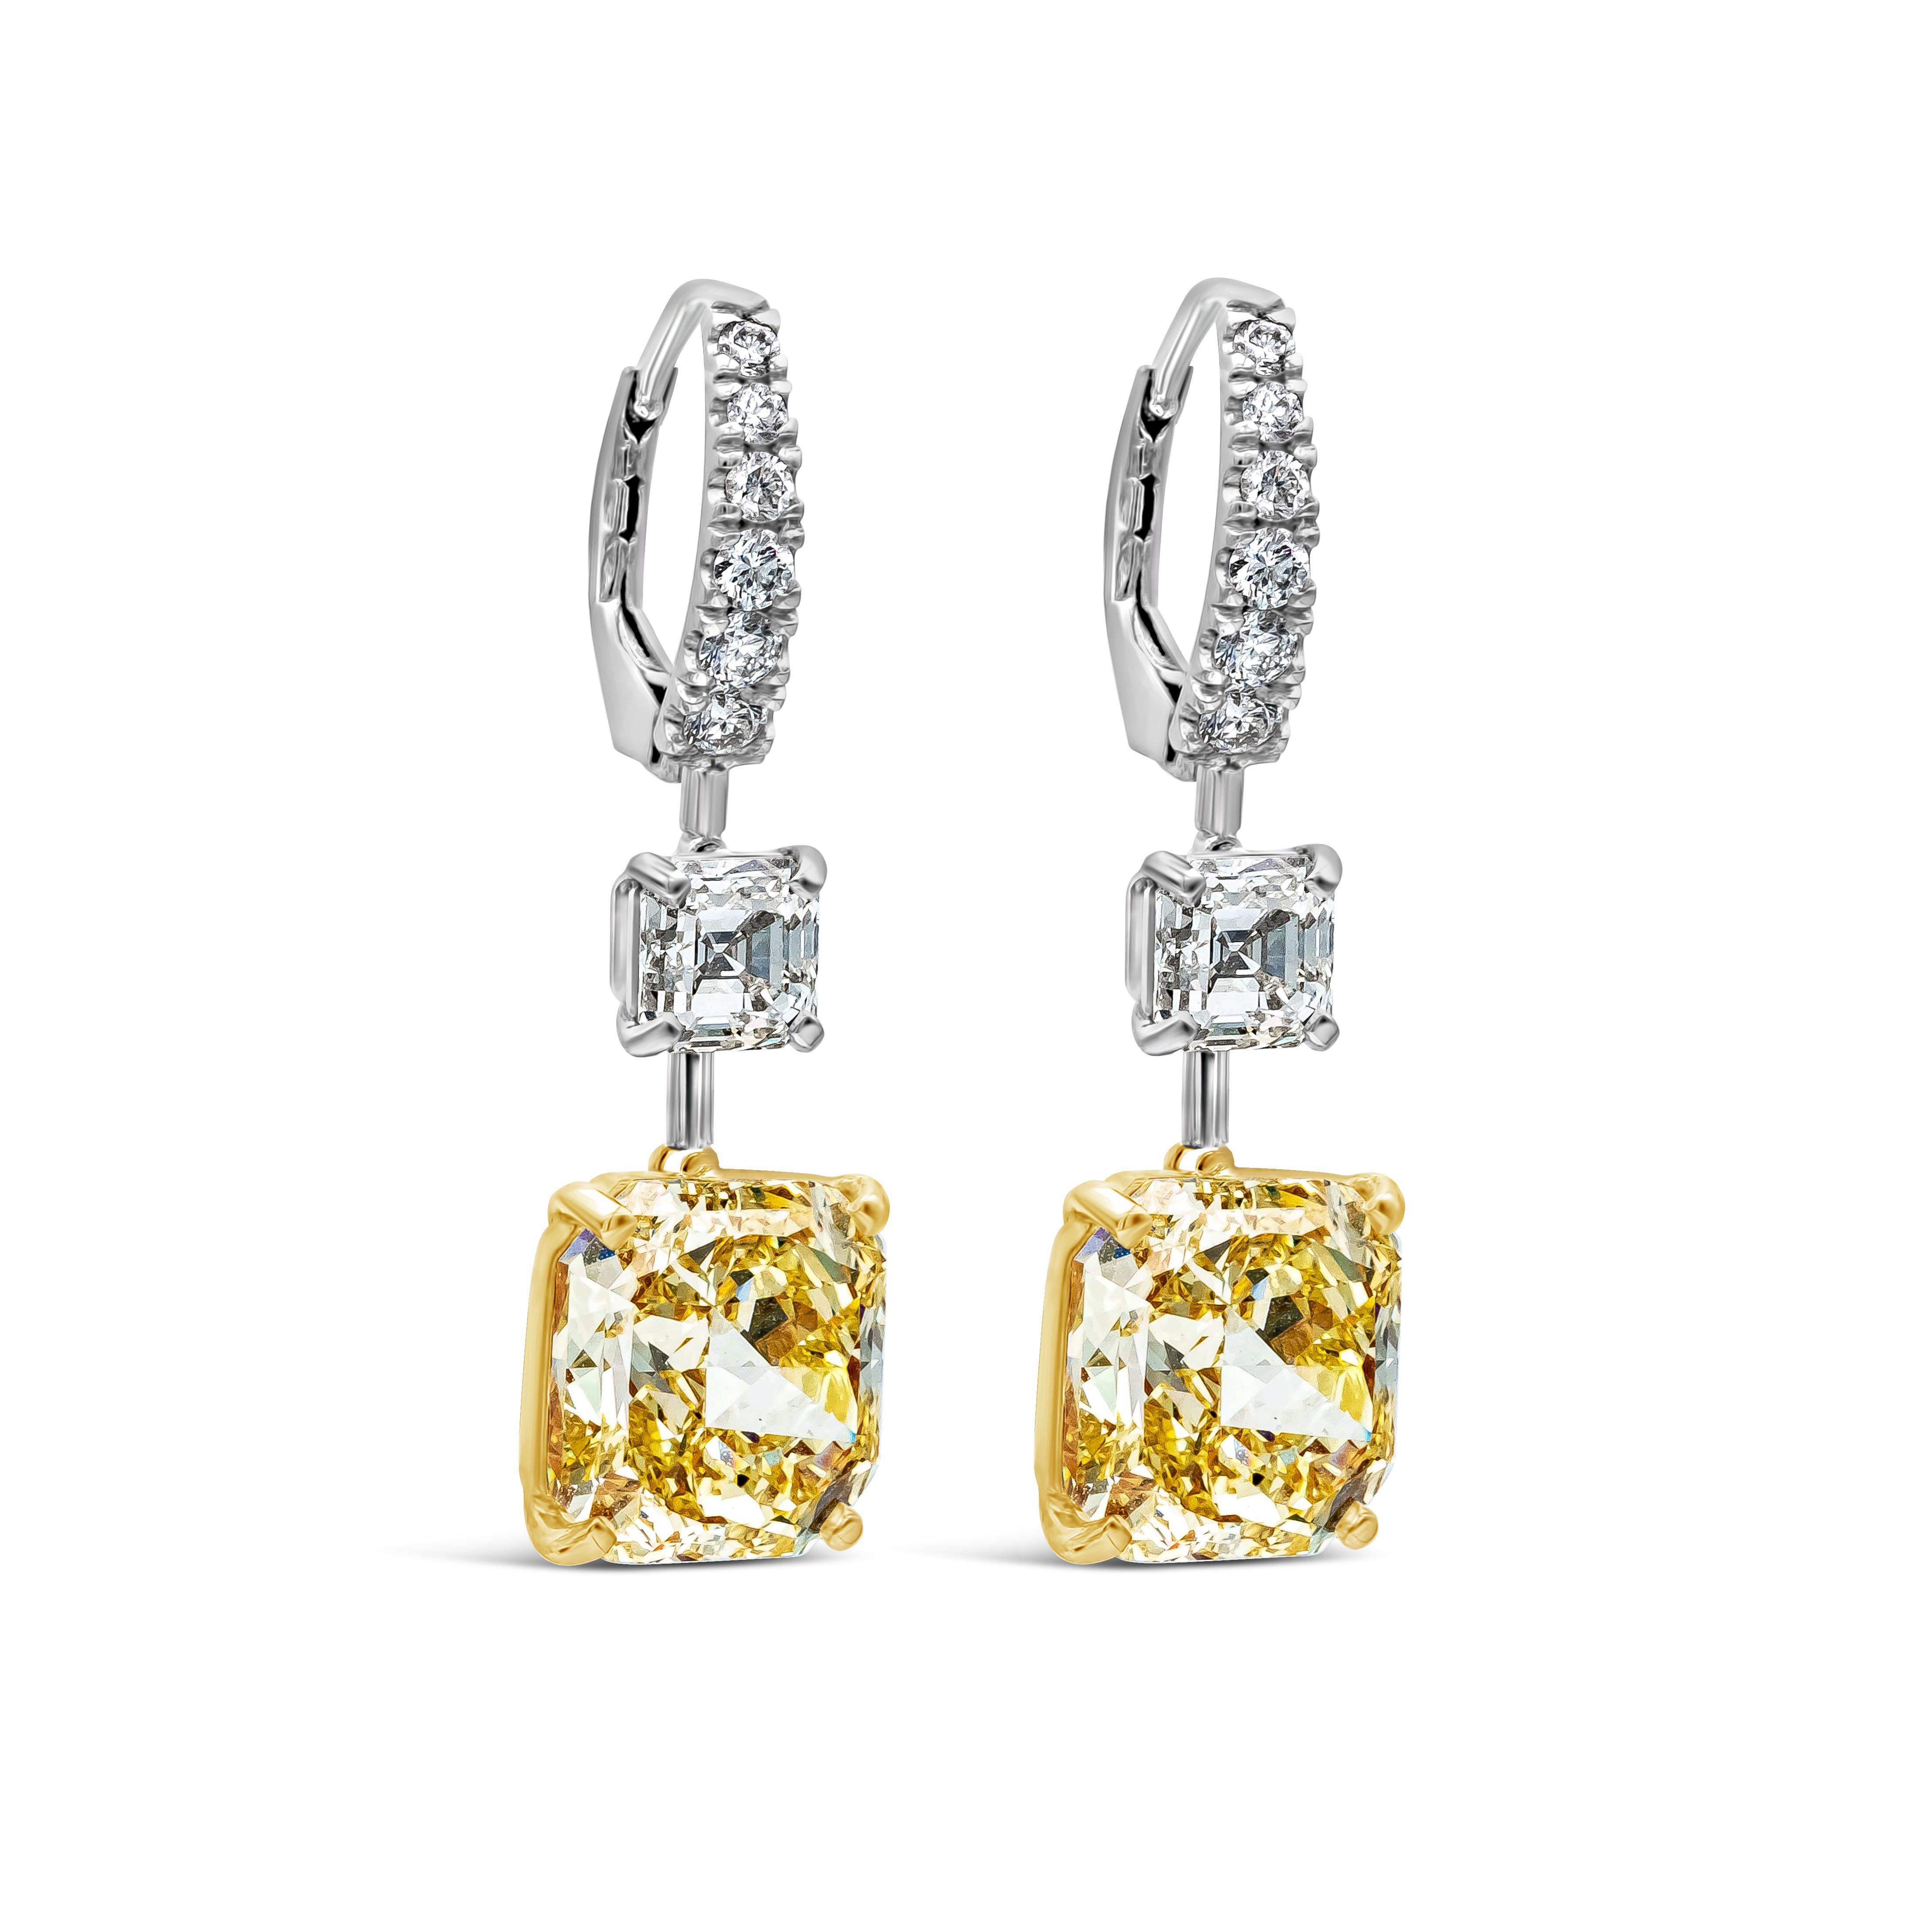 These gorgeous earrings feature 2 GIA Certified 8.48 Carat Total Radiant Cut Fancy Intense Yellow Color and VS1 in Clarity. Suspended on a GIA Certified Asscher cut white diamond weighing 1.42 carats total, H Color and VVS in Clarity. Accented lever